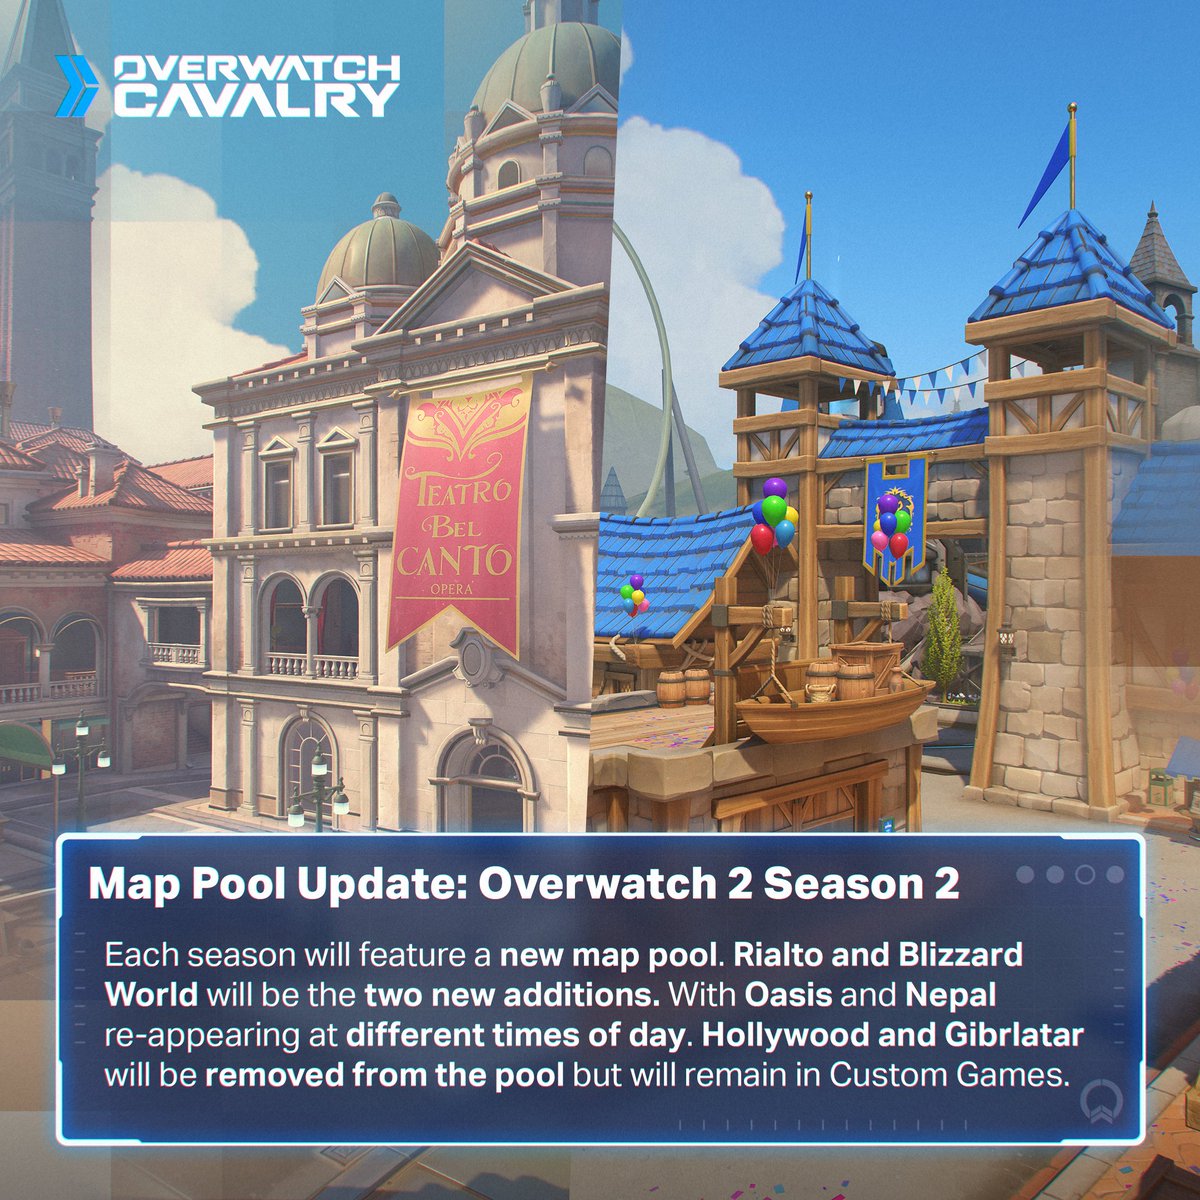 Rialto and Blizzard World will be returning to the Overwatch 2 Map Pool 🗺️

These two maps will take the place of Hollywood and Watchpoint: Gibraltar in Season 2, whilst Oasis and Nepal remain in rotation at a new time of day 🌧️